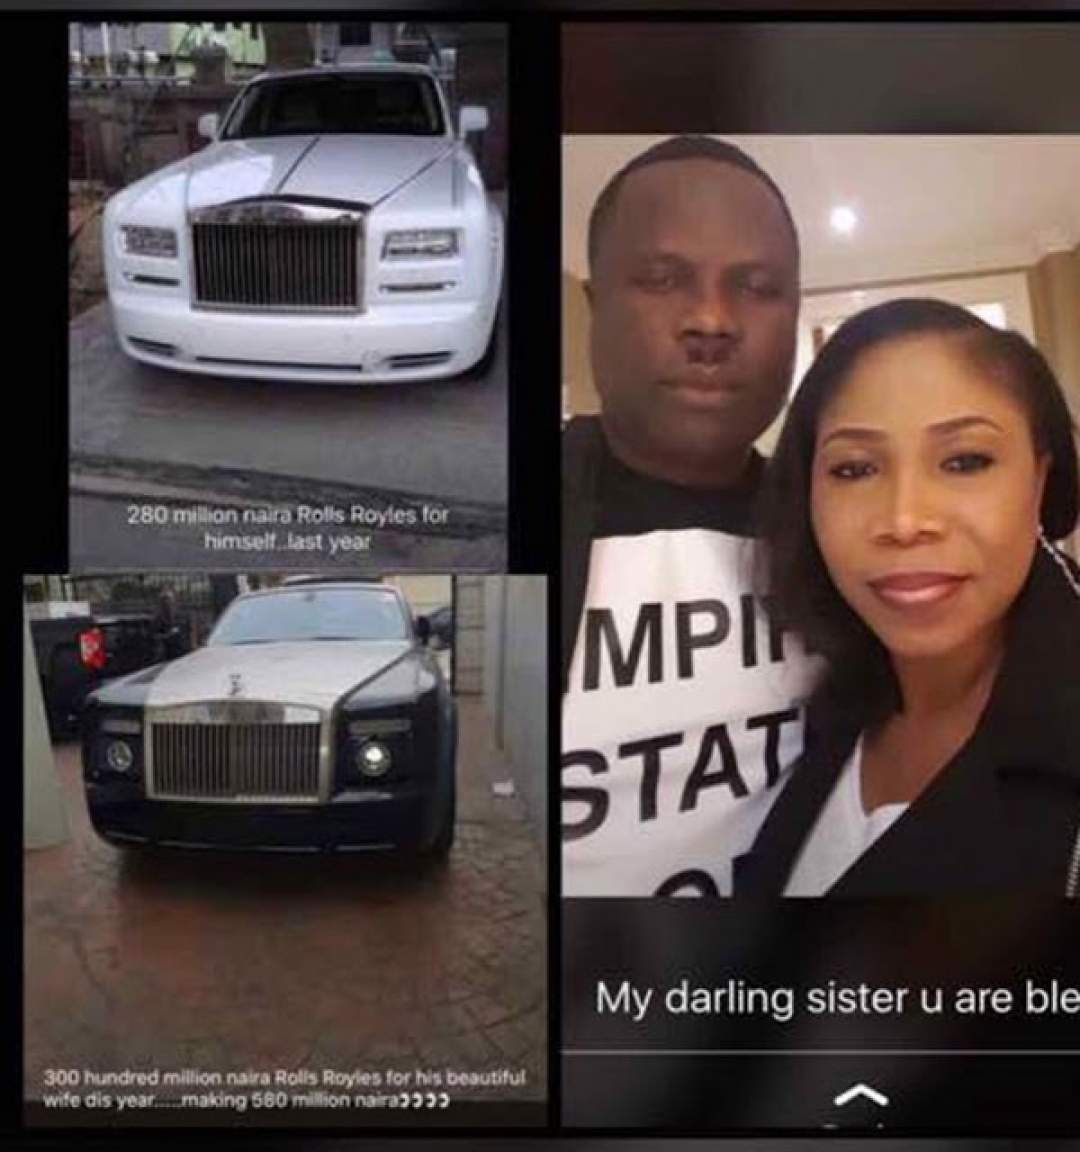 Nigerian billionaire, Kenneth Bramor buys first wife a Rolls Royce after marrying a 2nd wife